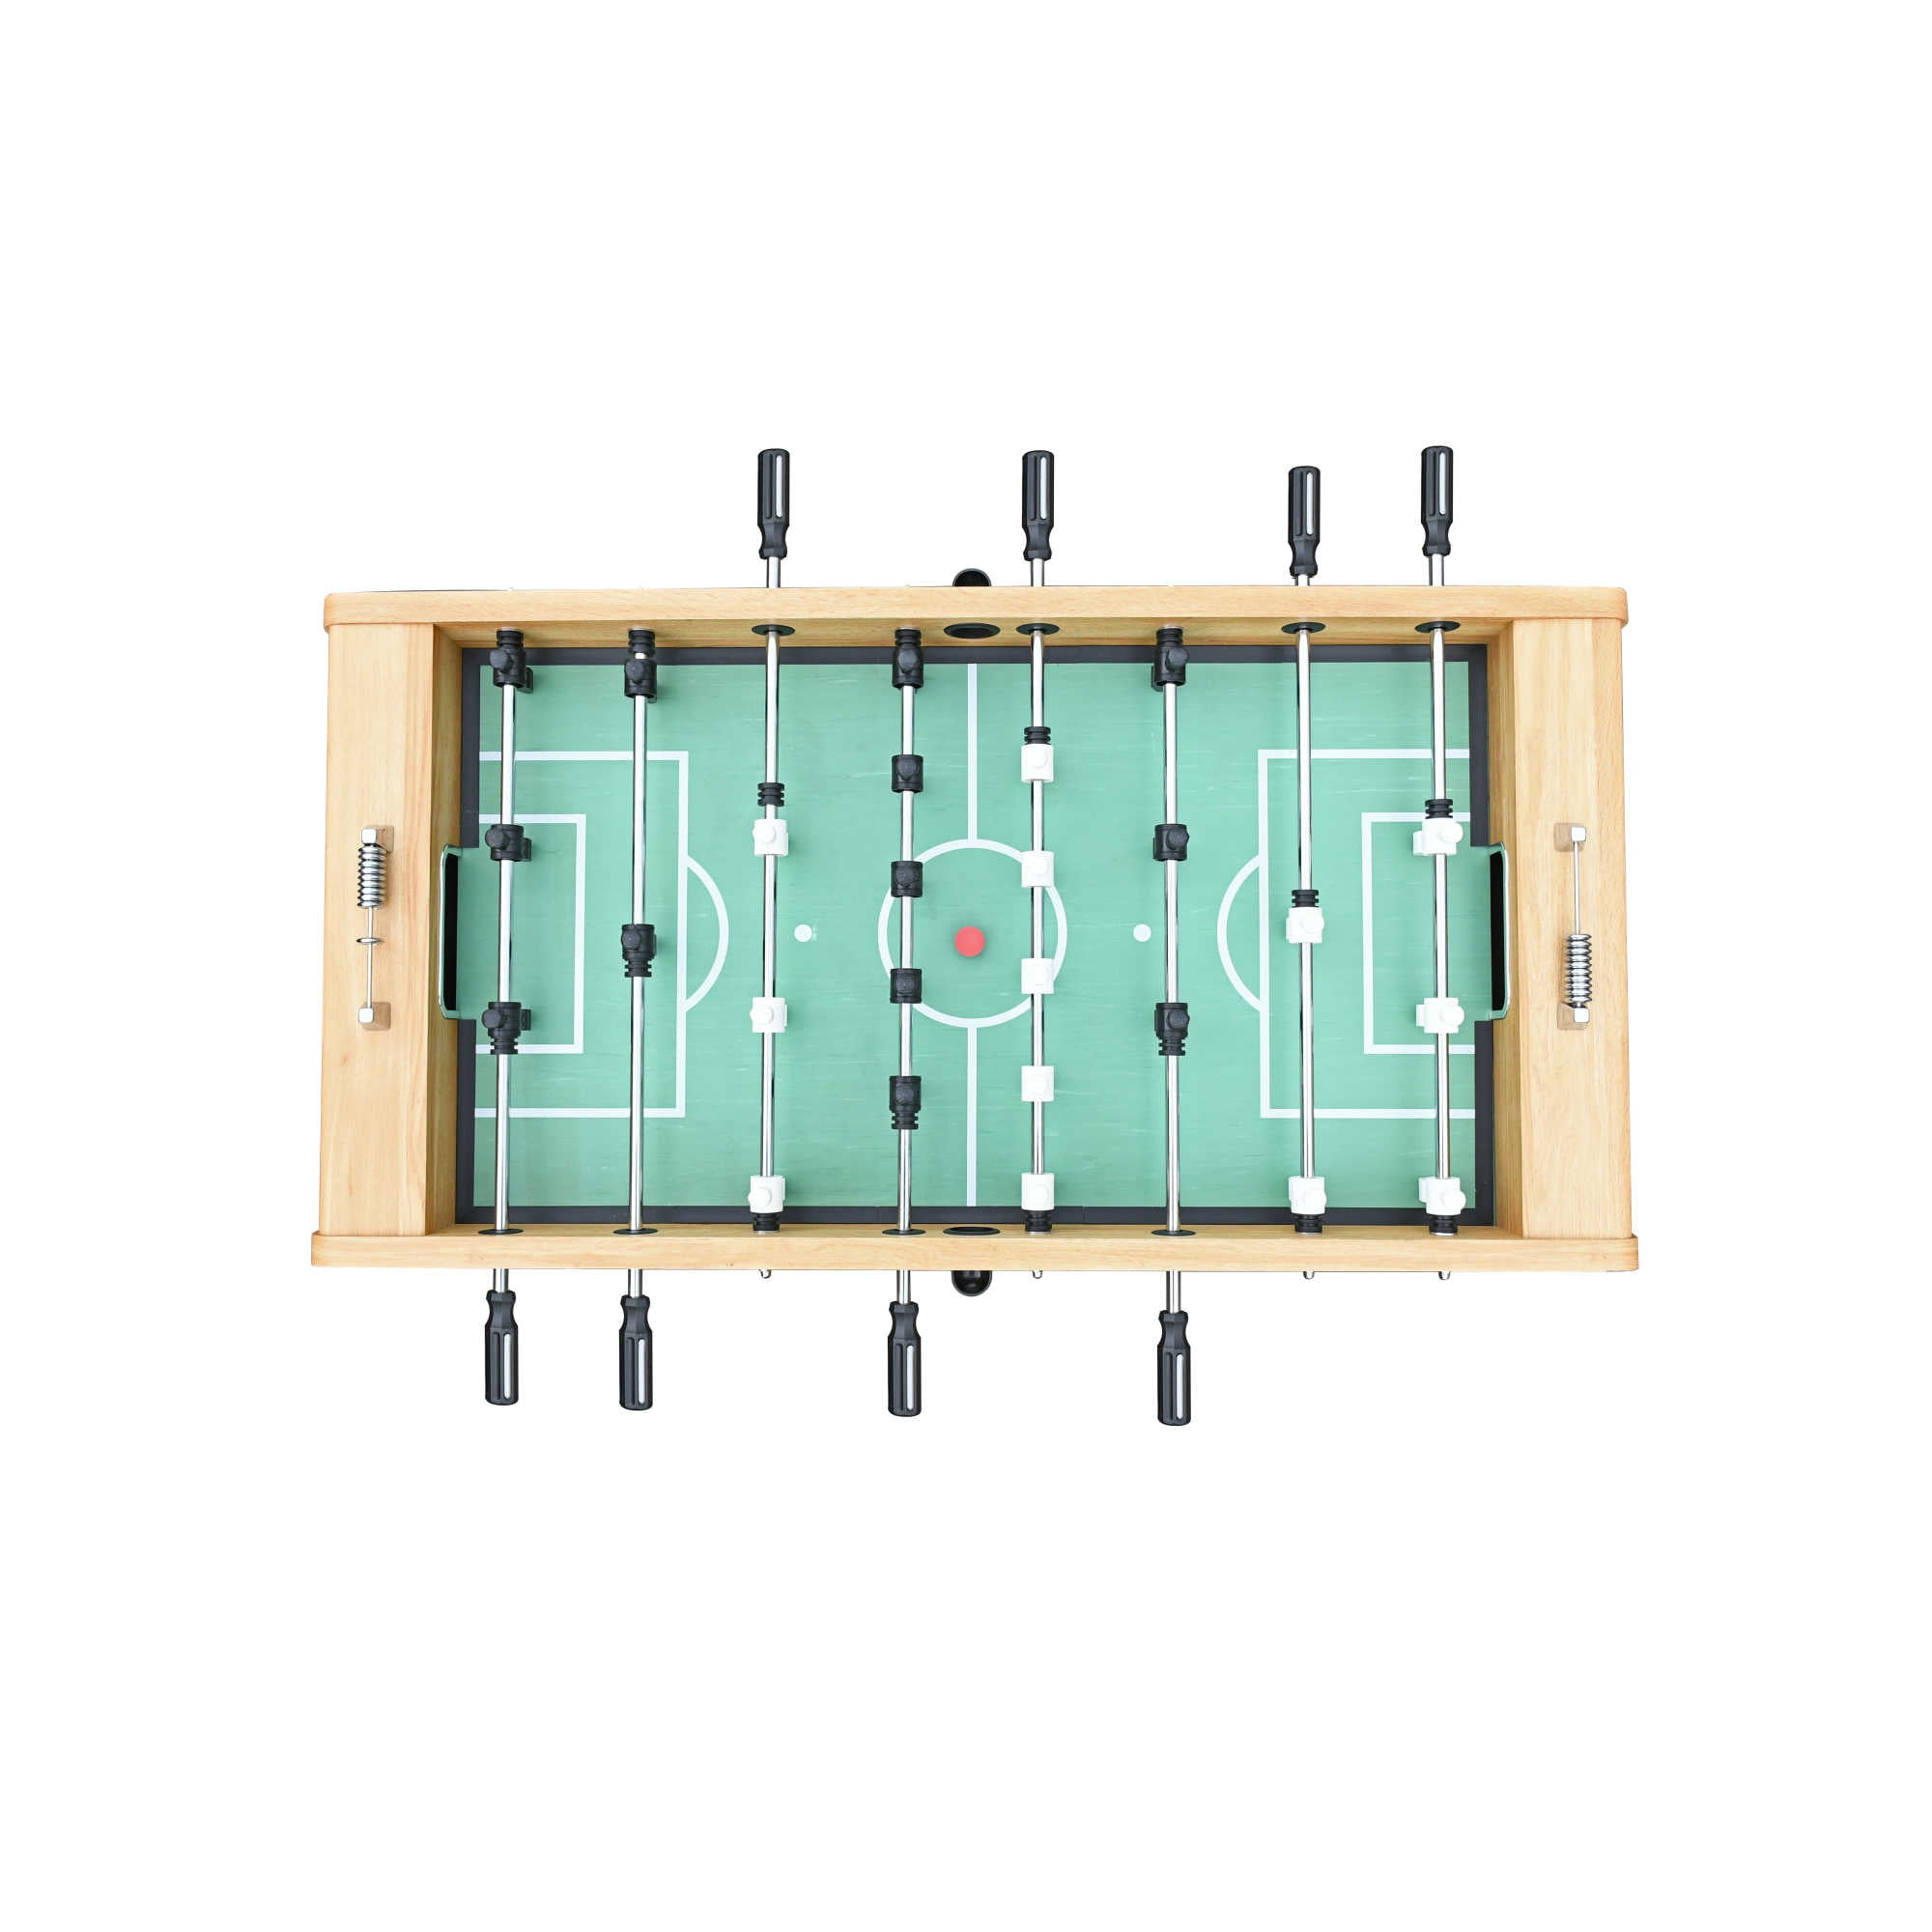 Hathaway 59 Center Stage Pro Series Stand Alone Foosball Table, Light Oak  